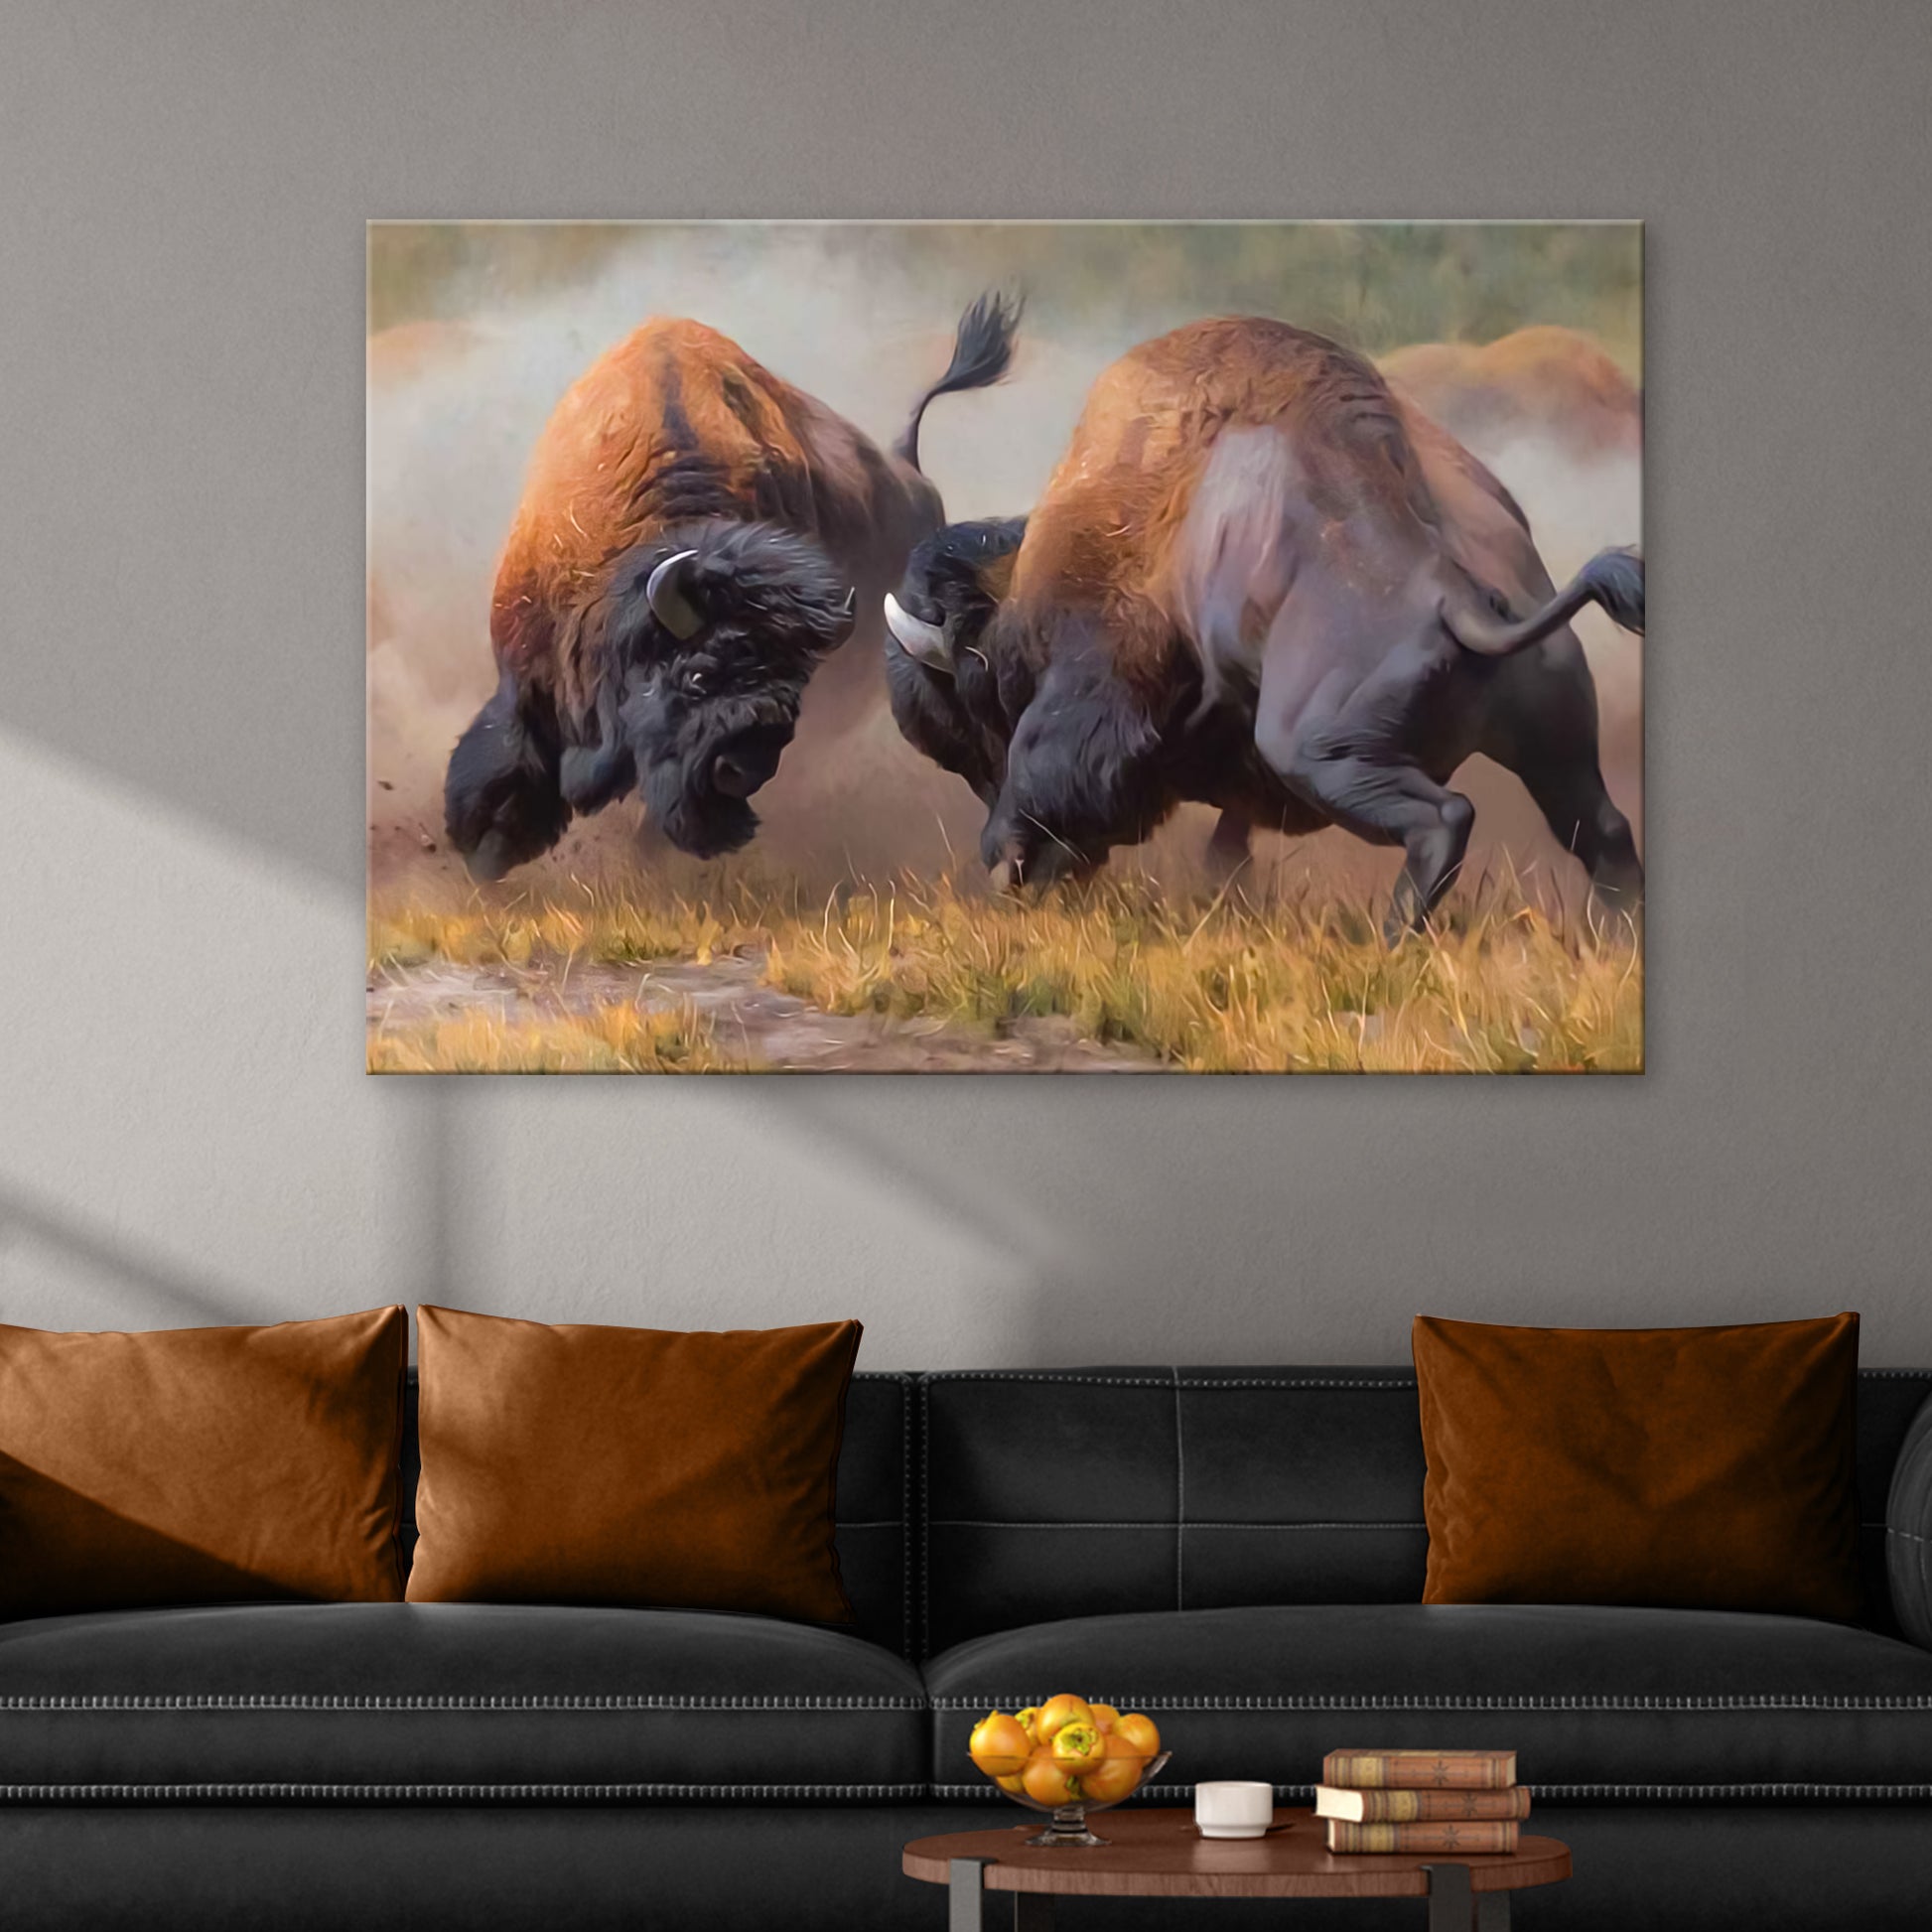 Bison Clash Canvas Wall Art - Image by Tailored Canvases